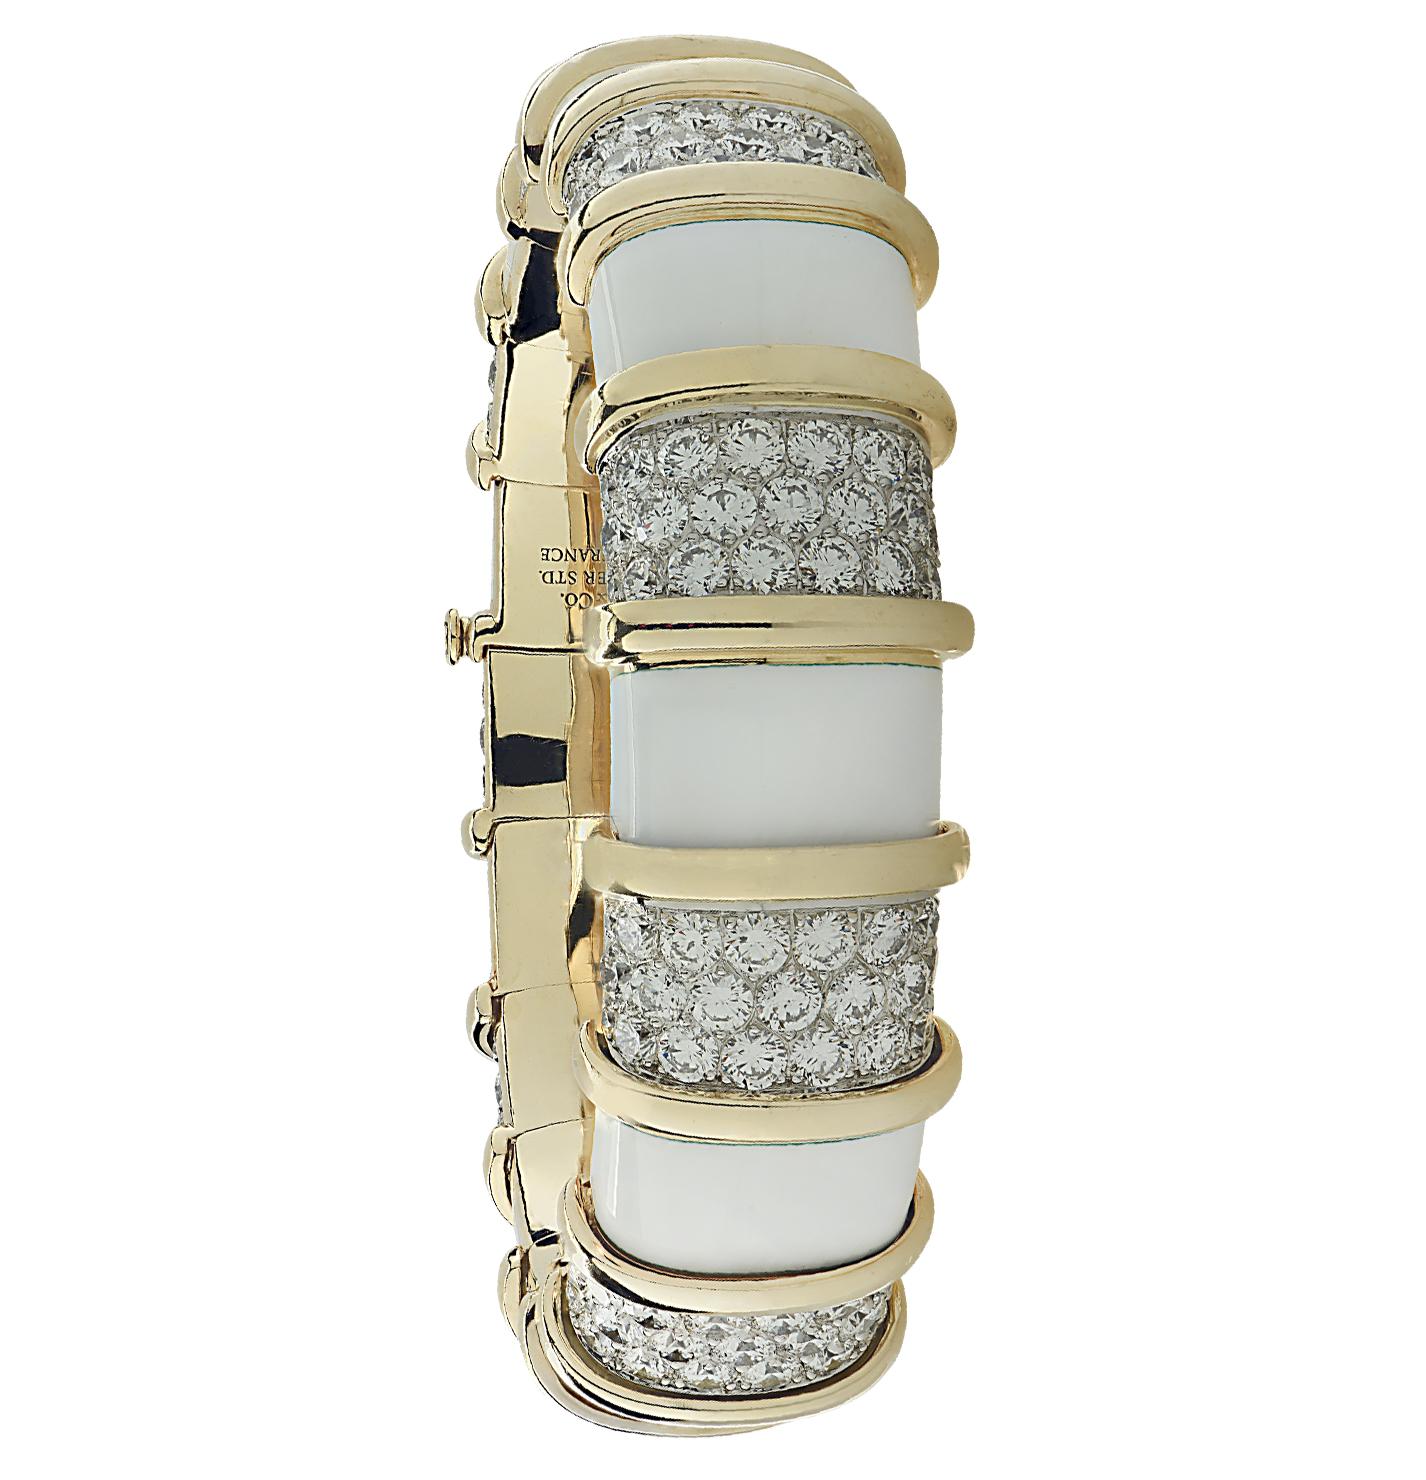 Stunning Tiffany & Co. Schlumberger Bangle Bracelet, crafted in Platinum and 18 karat yellow gold and white enamel, featuring 207 round brilliant cut diamonds weighing approximately 22.5 carats total, E-F color, VVS-VS clarity. Diamond encrusted